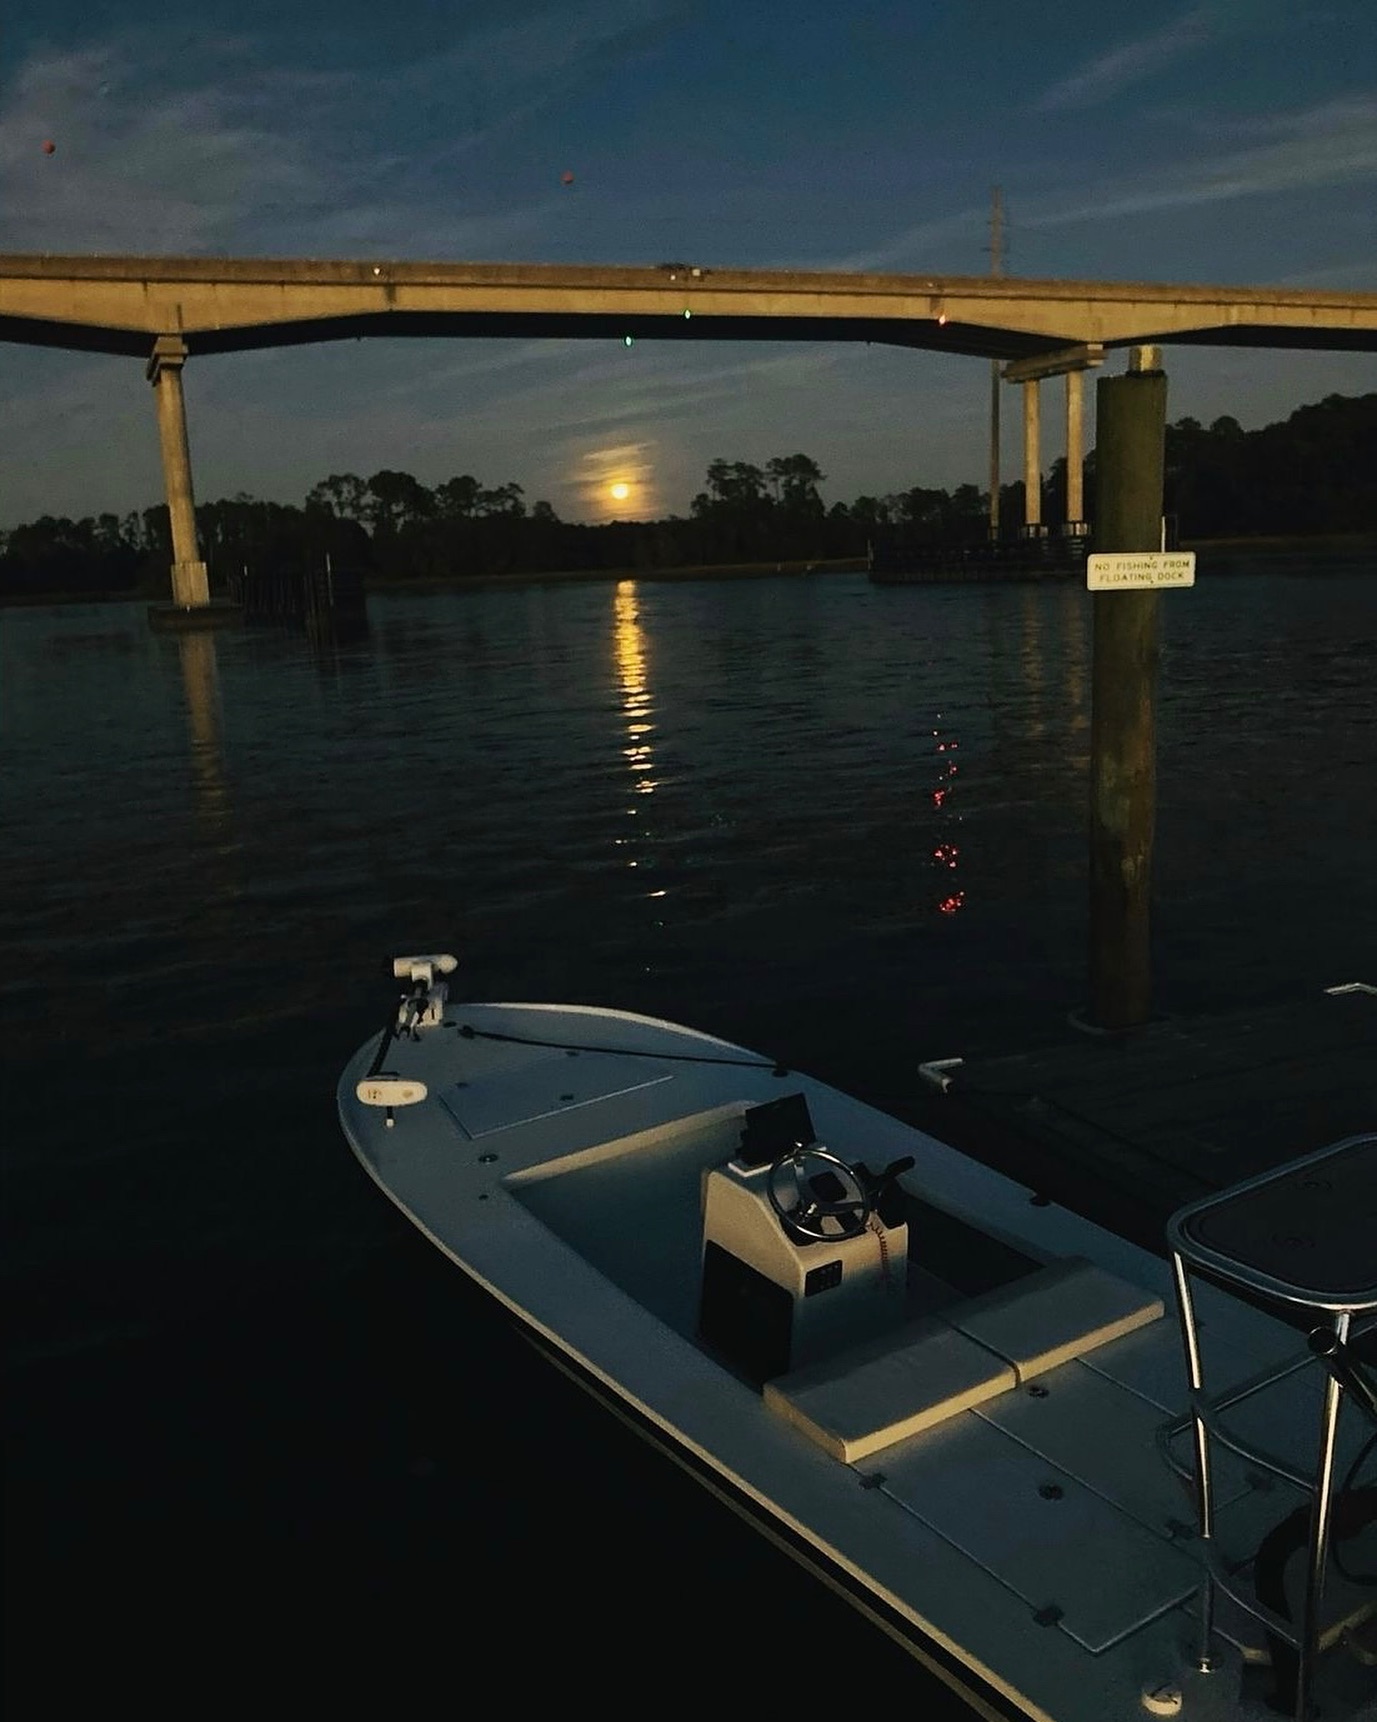 When the sun sets on the skiff, it’s a good day fishing.